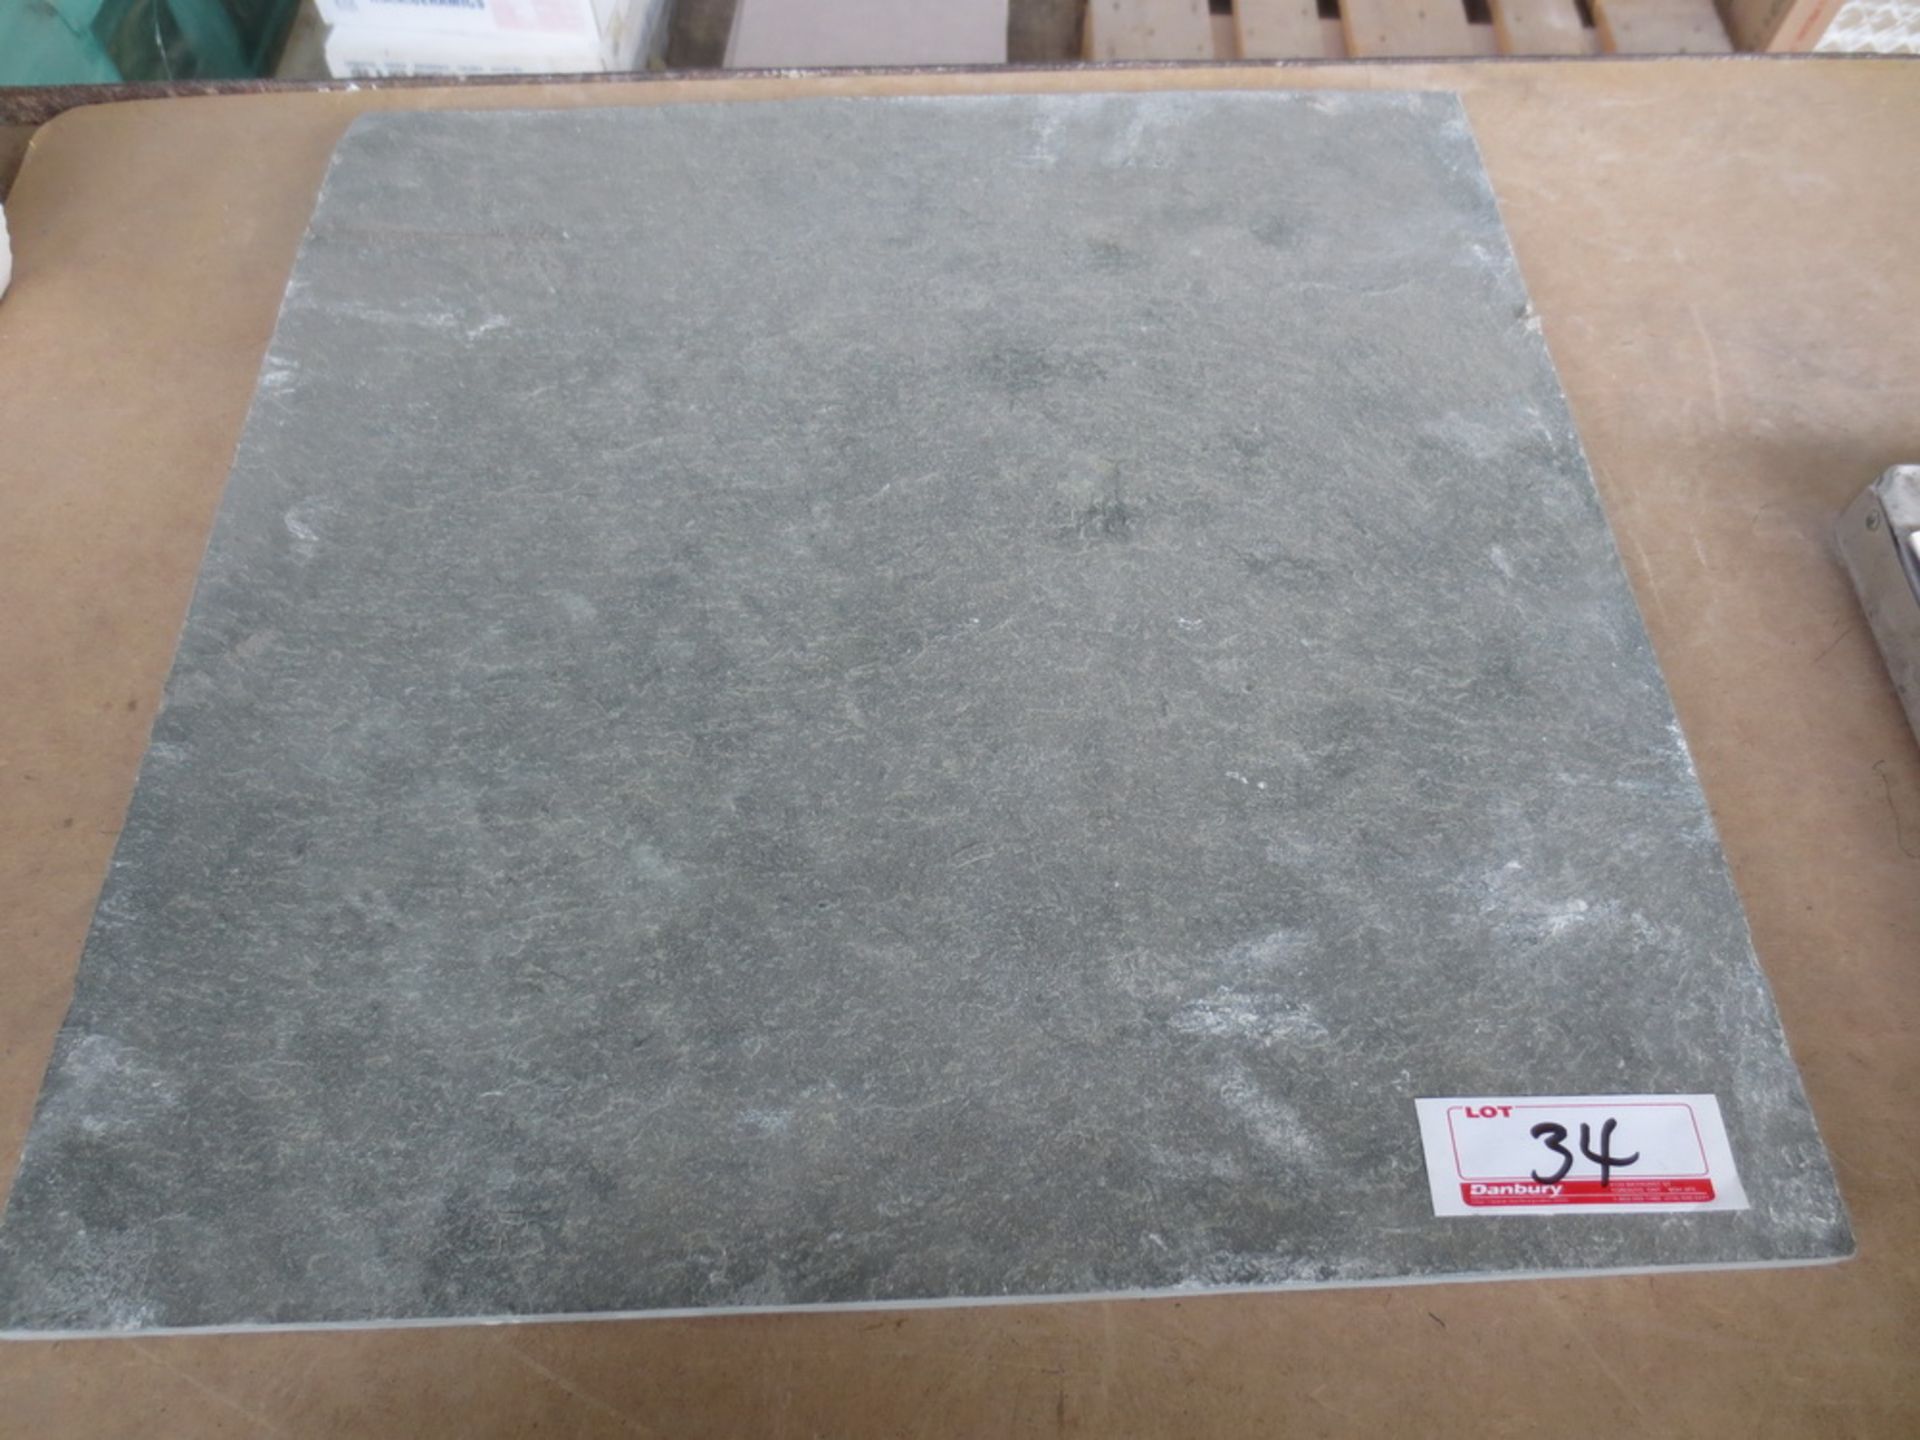 213 - SQ. FT. GREEN APPROX 153/4X153/4 SLATE TILES 24 BOXES